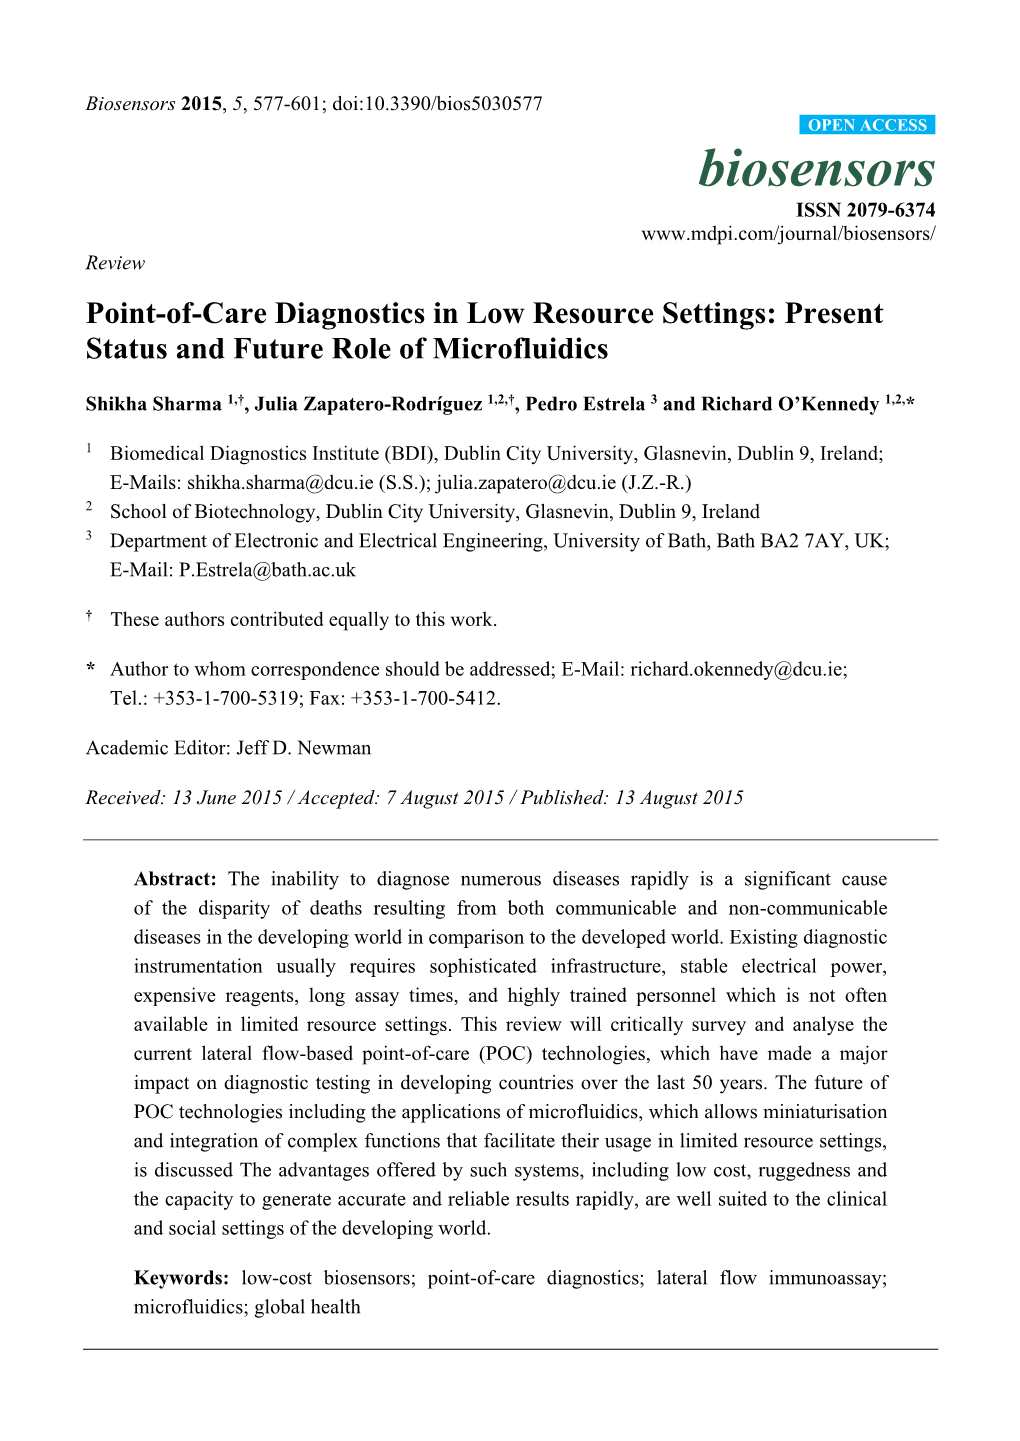 Point-Of-Care Diagnostics in Low Resource Settings: Present Status and Future Role of Microfluidics